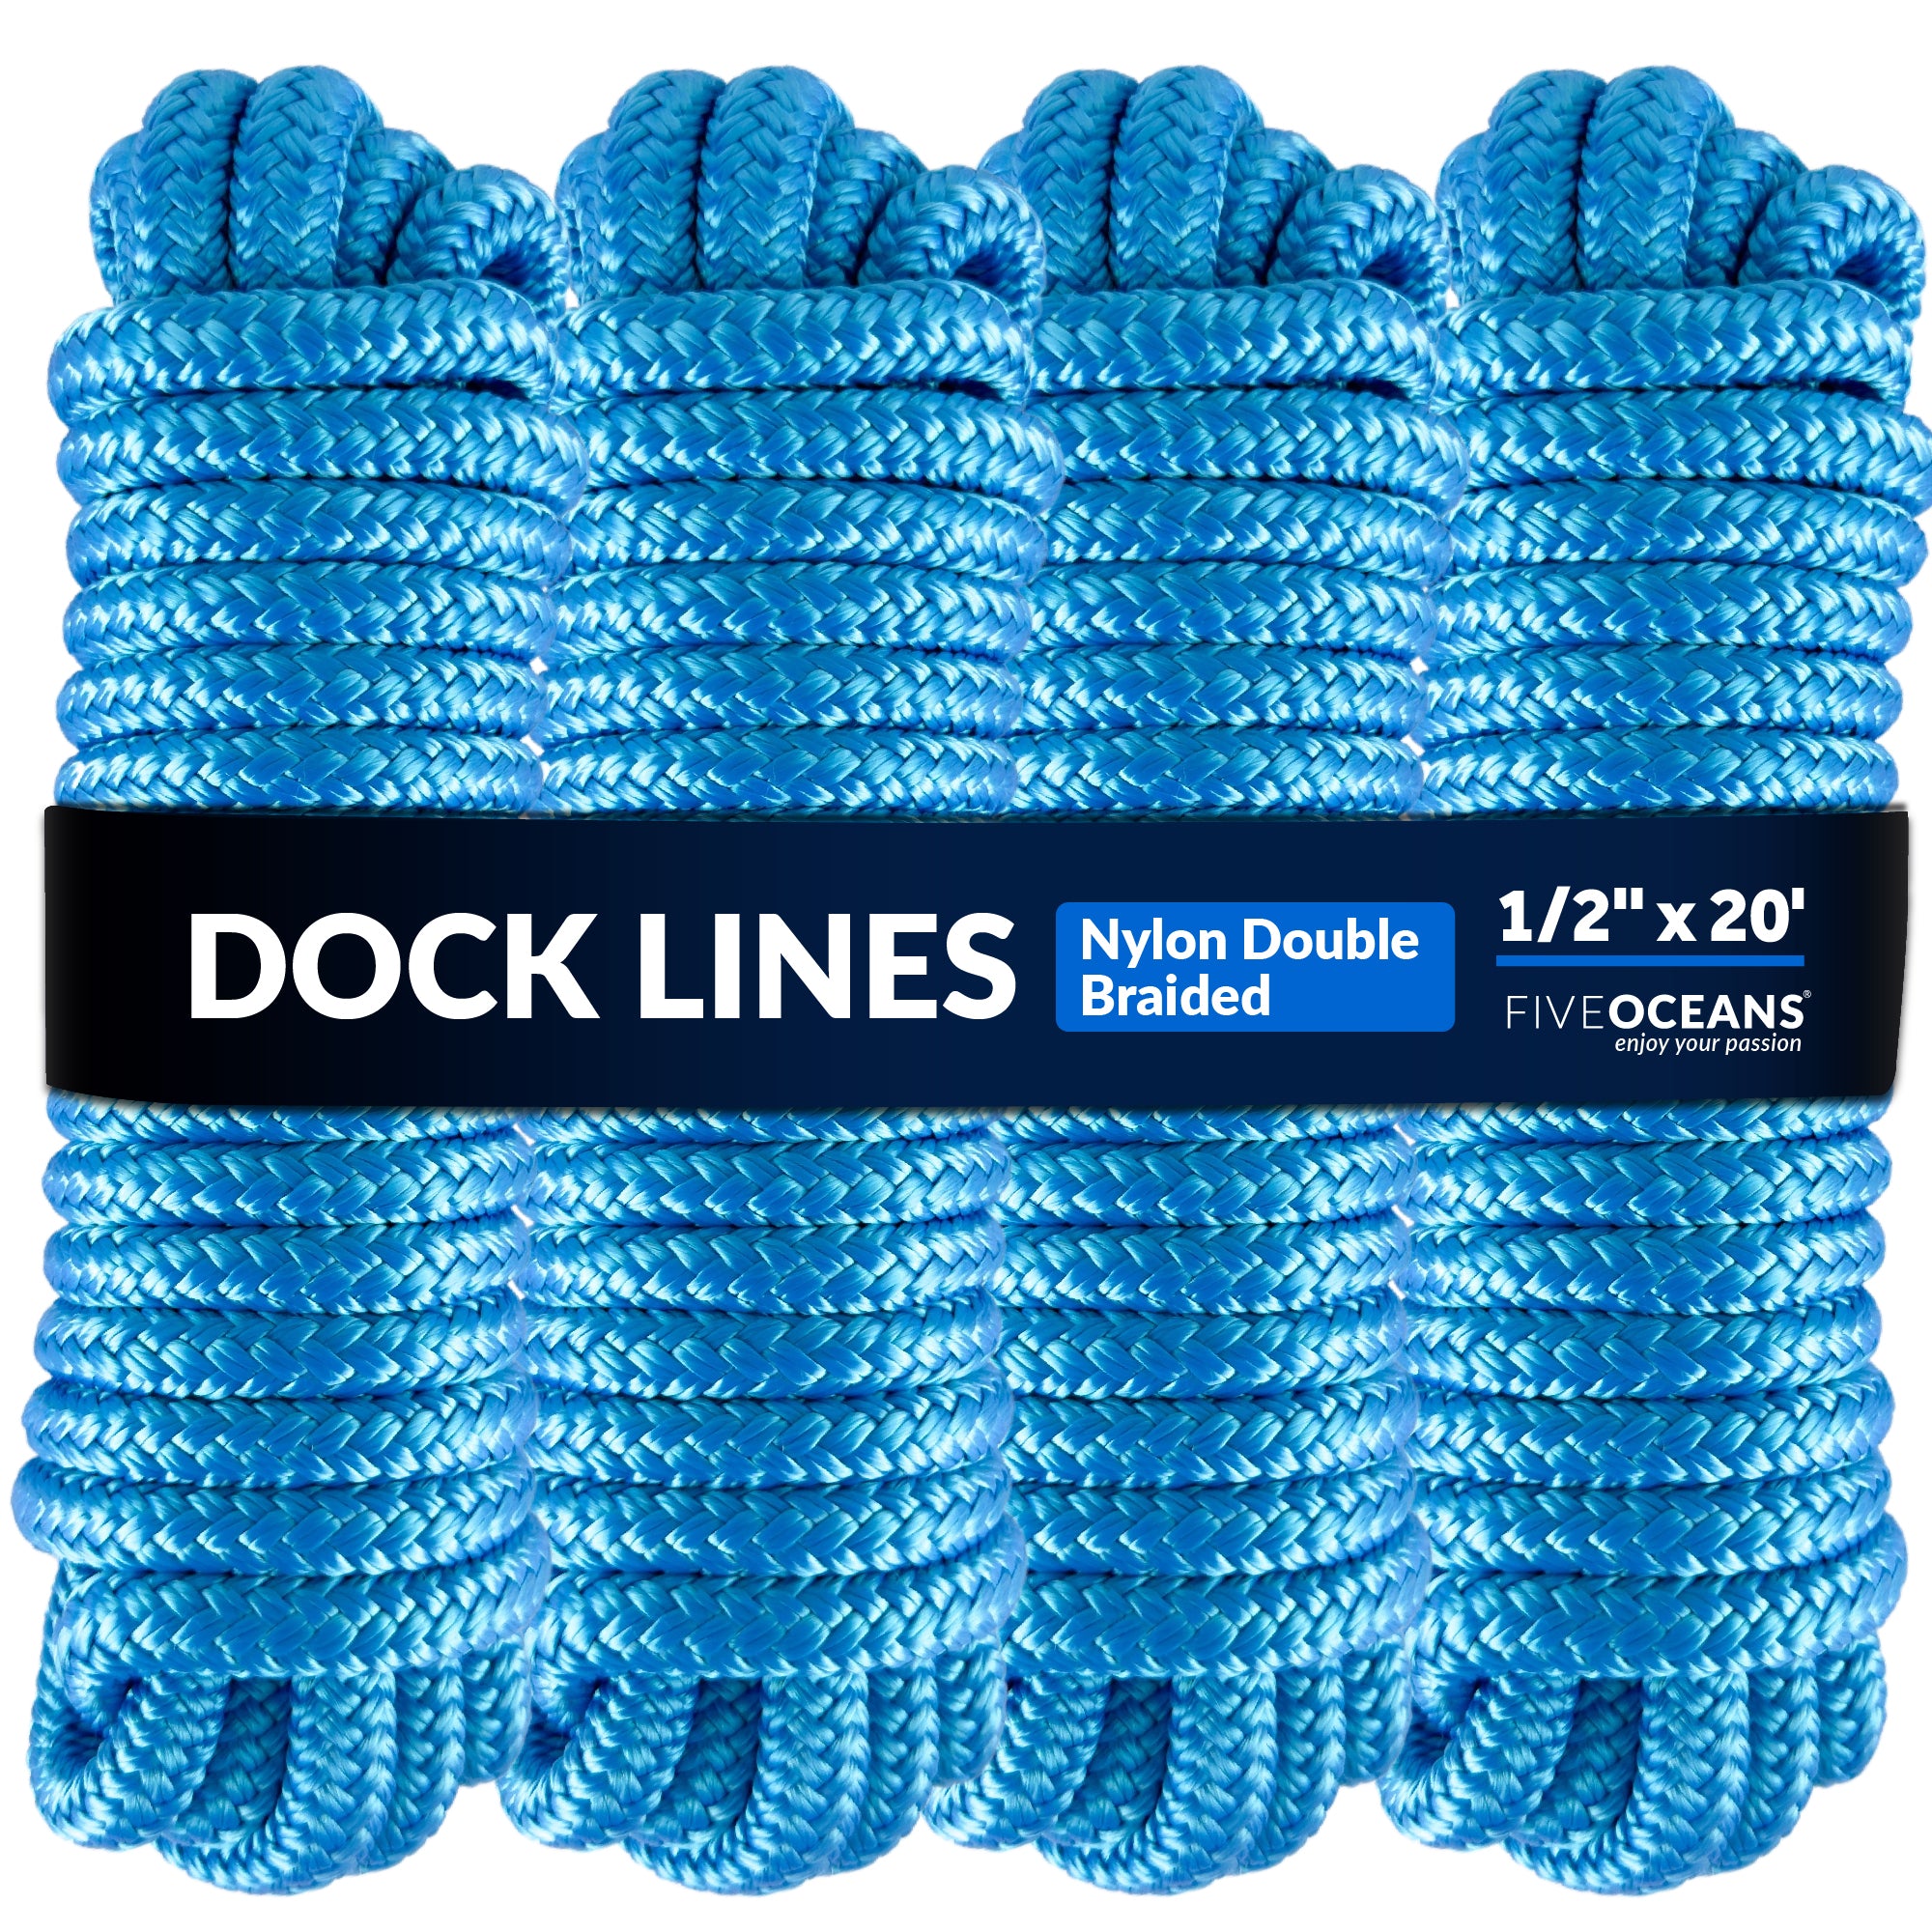 Dock Lines, 1/2" x 20', Light Blue Nylon Double Braided with 12" Eyelet, 4-Pack - FO4621-M4